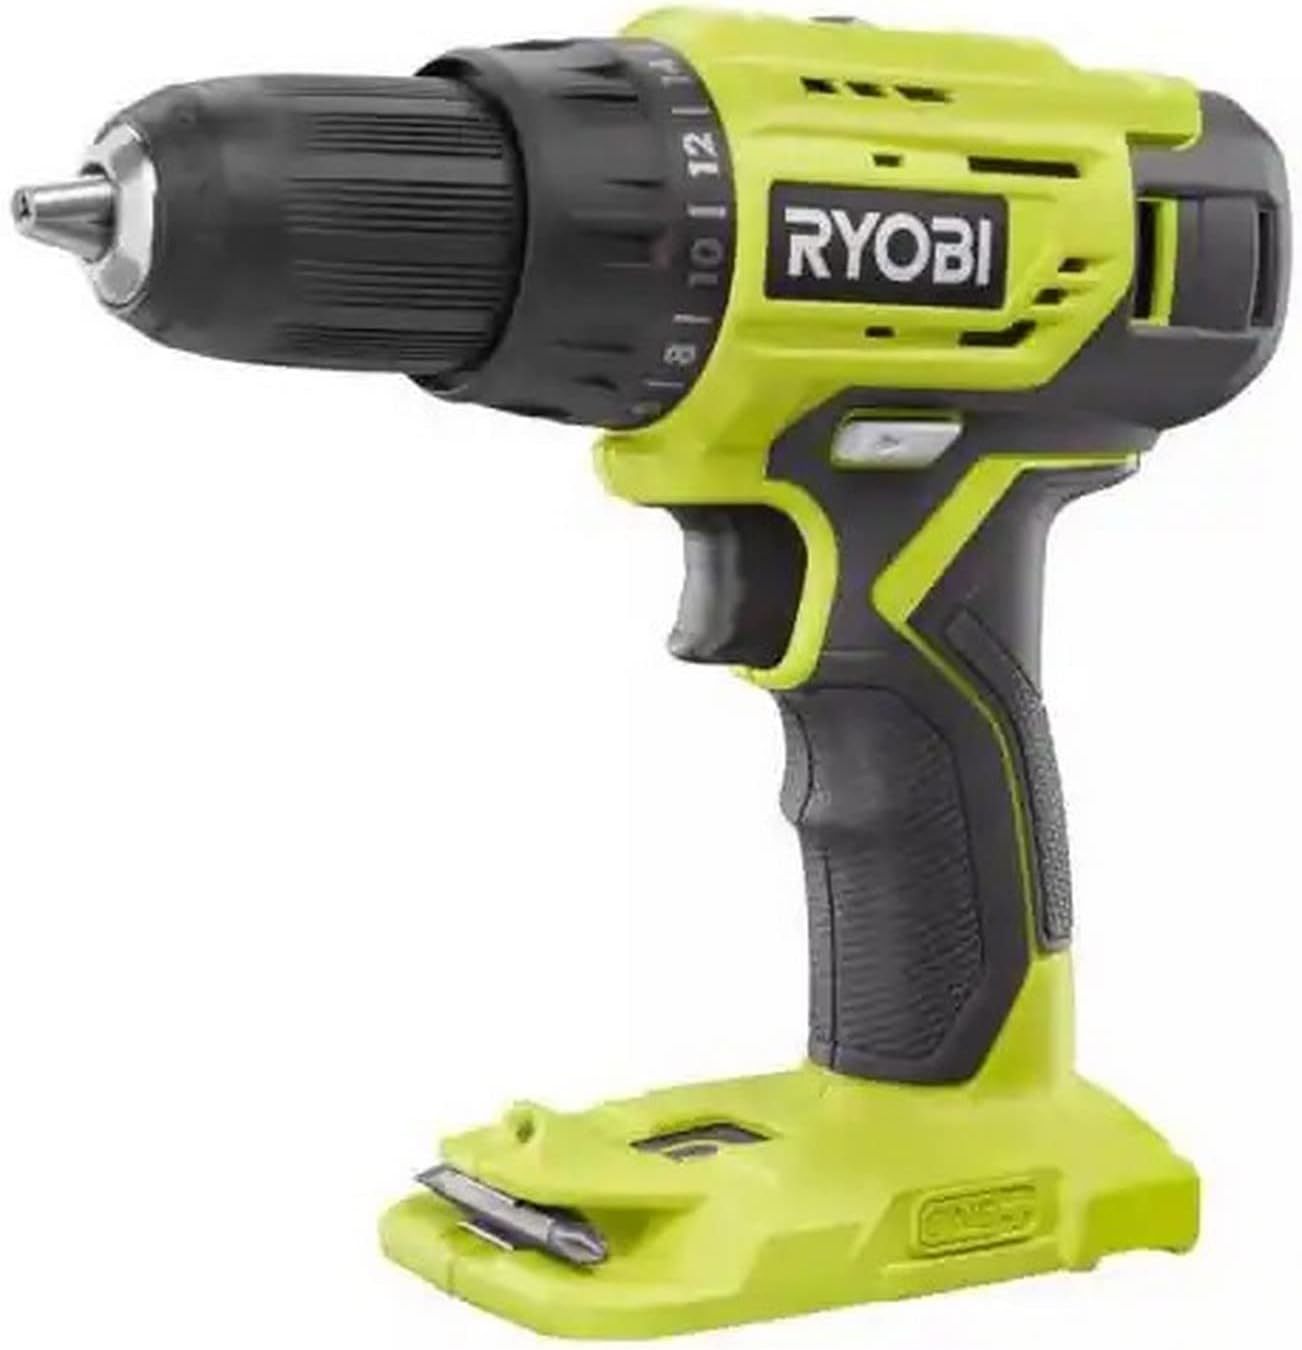 Drill/Driver (Tool Only) P215Bn, Ryobi One 18V Cordless, 1/2 In. - $82.96